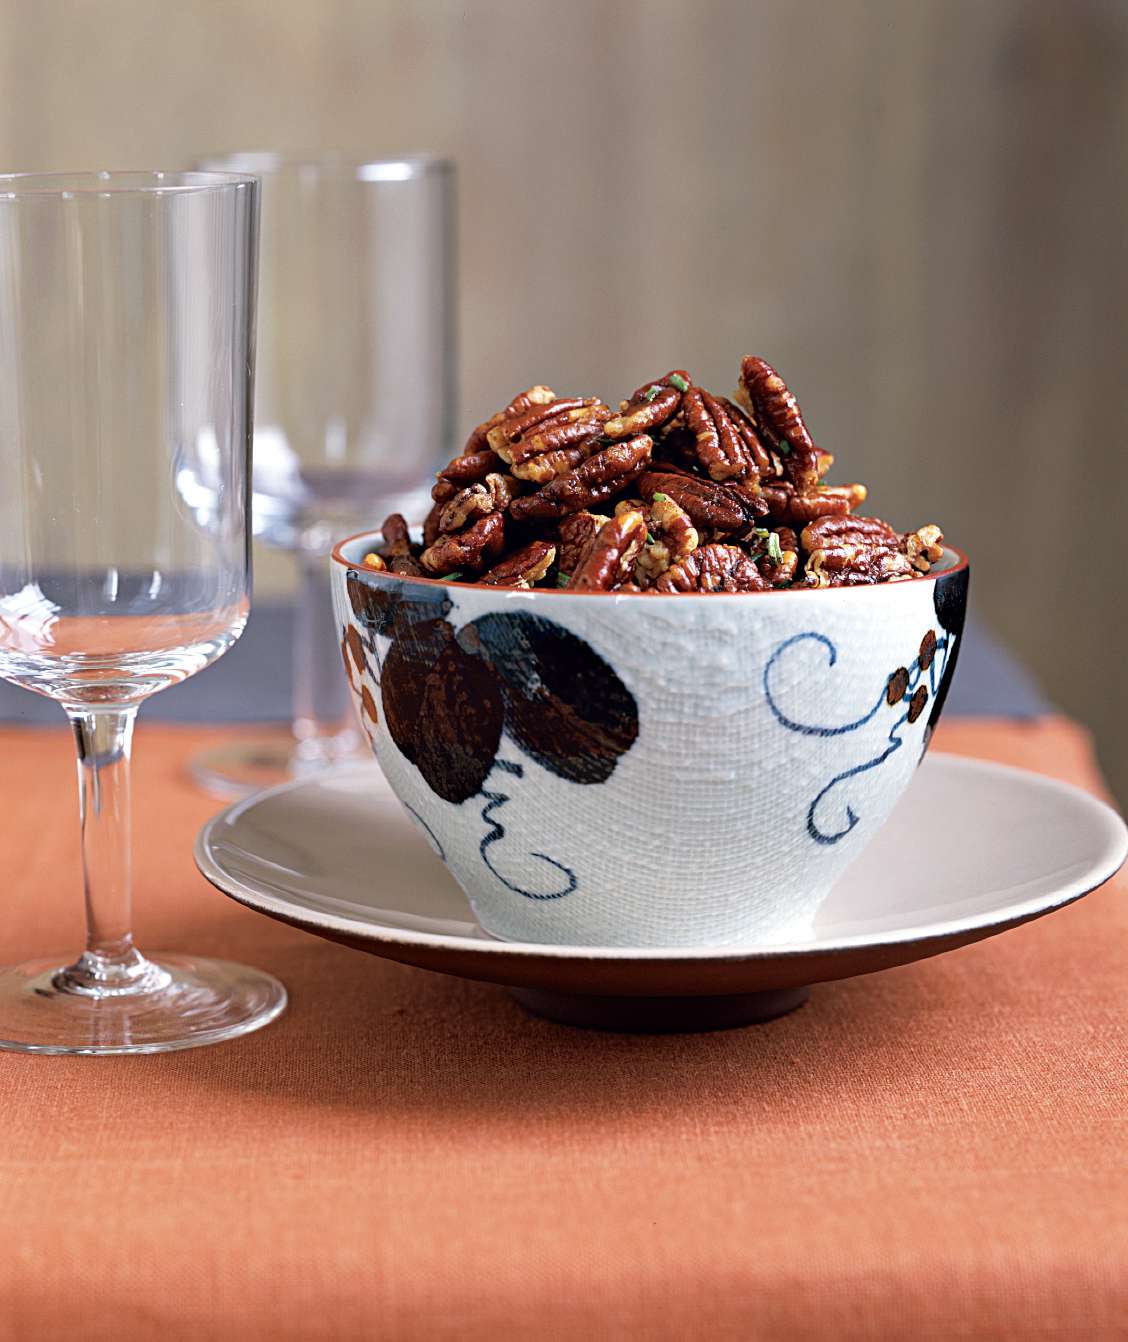 Rosemary pecans are served in a decorative bowl.